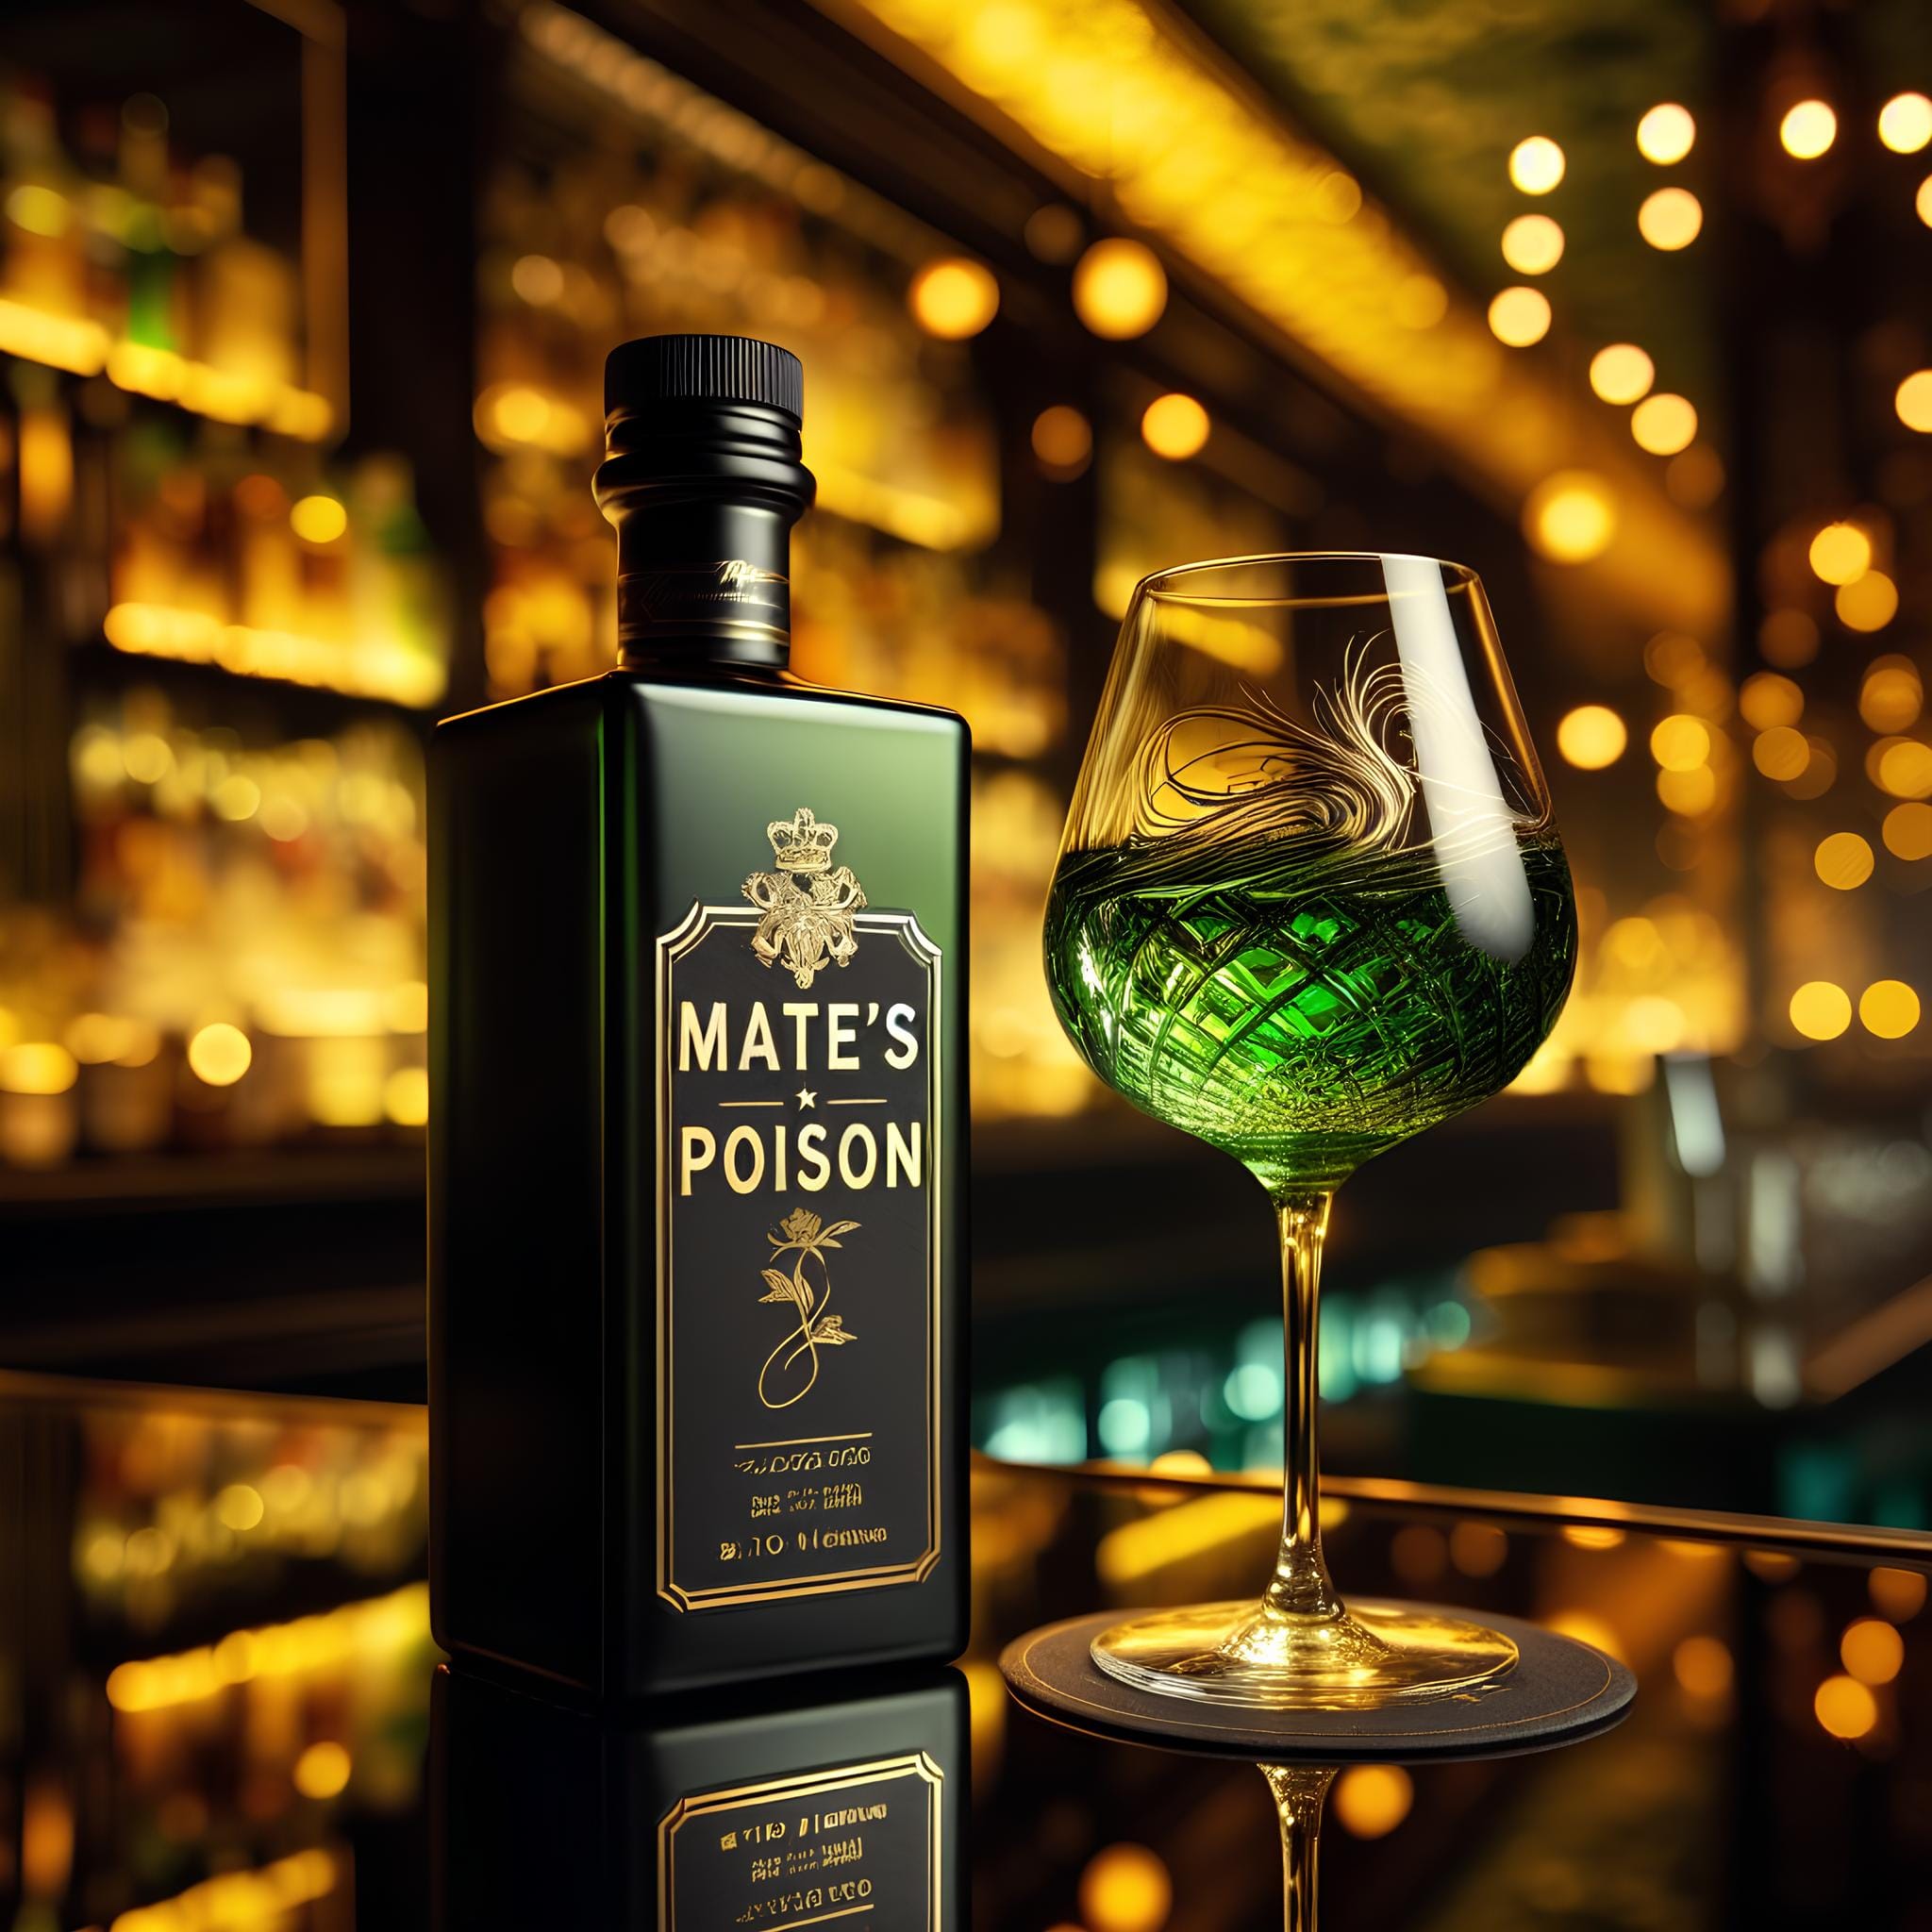 Choose your poison  

on top of a black countertops of an exquisite liquor bar, ...